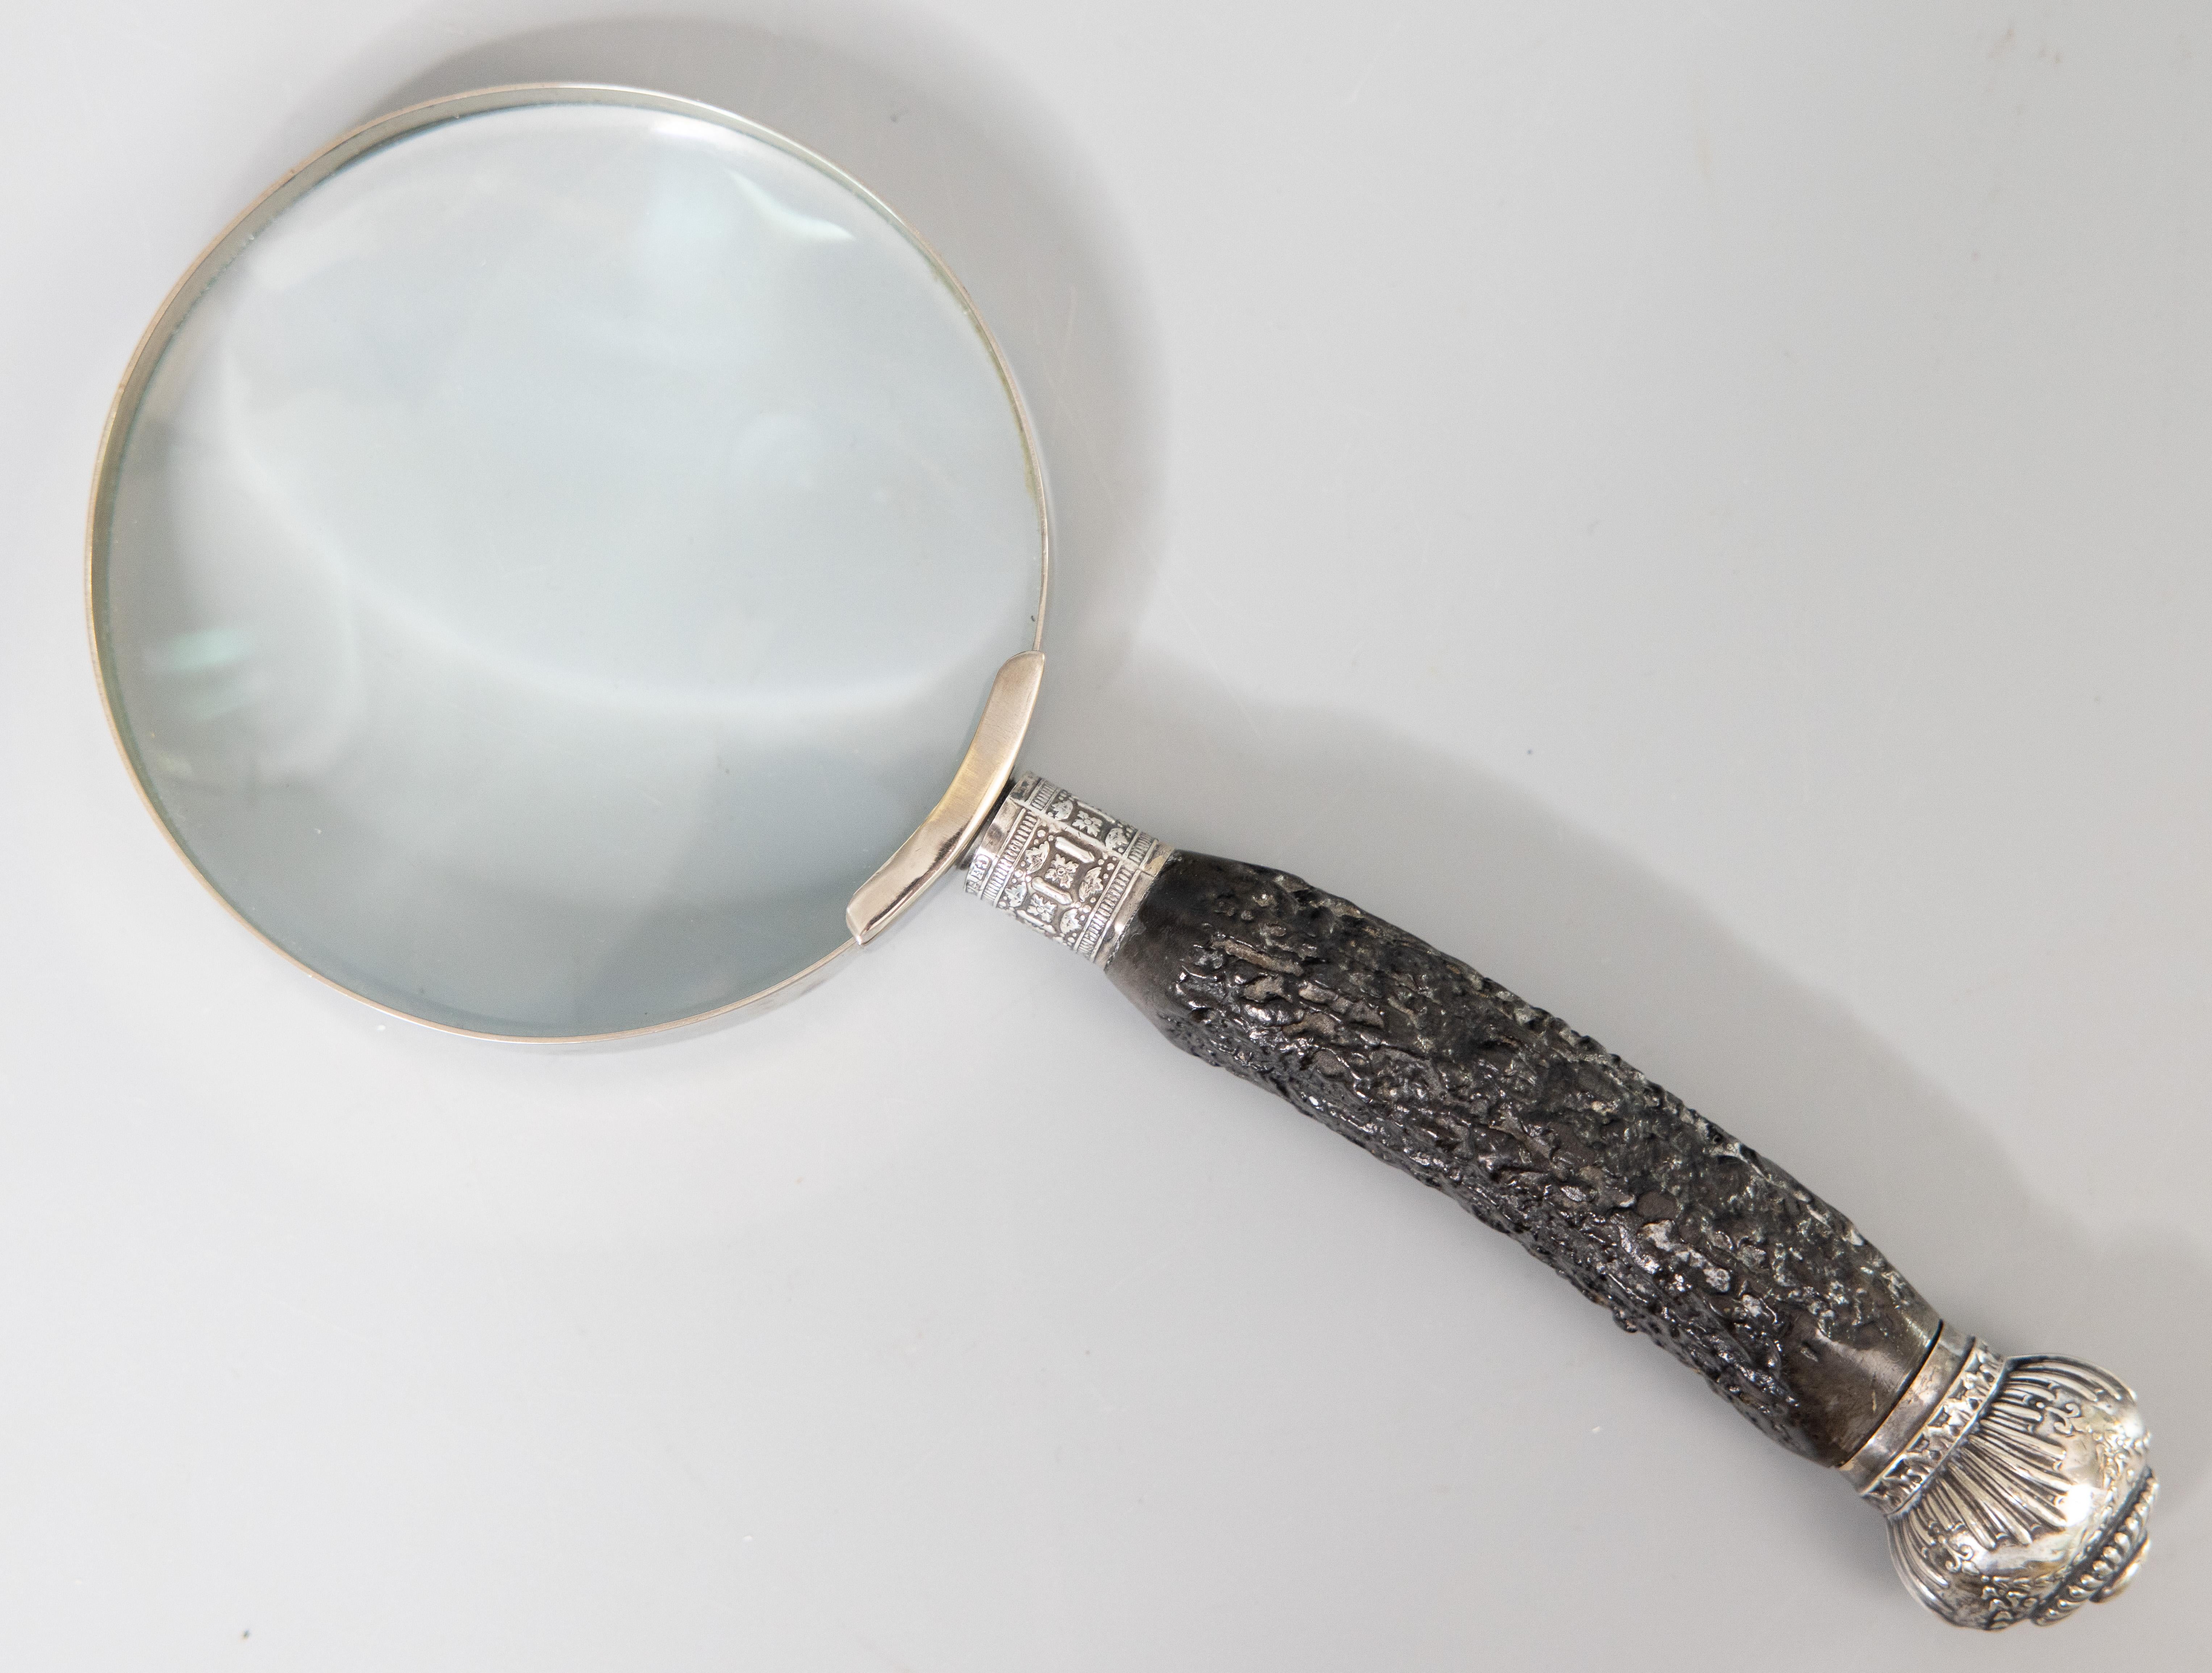 A fine antique English Edwardian antler horn and sterling silver magnifying glass by Harrison Brothers & Howson, Sheffield, England, dated 1912. Hallmarks on handle. This handsome magnifying glass has a stag antler horn handle with silver accents.